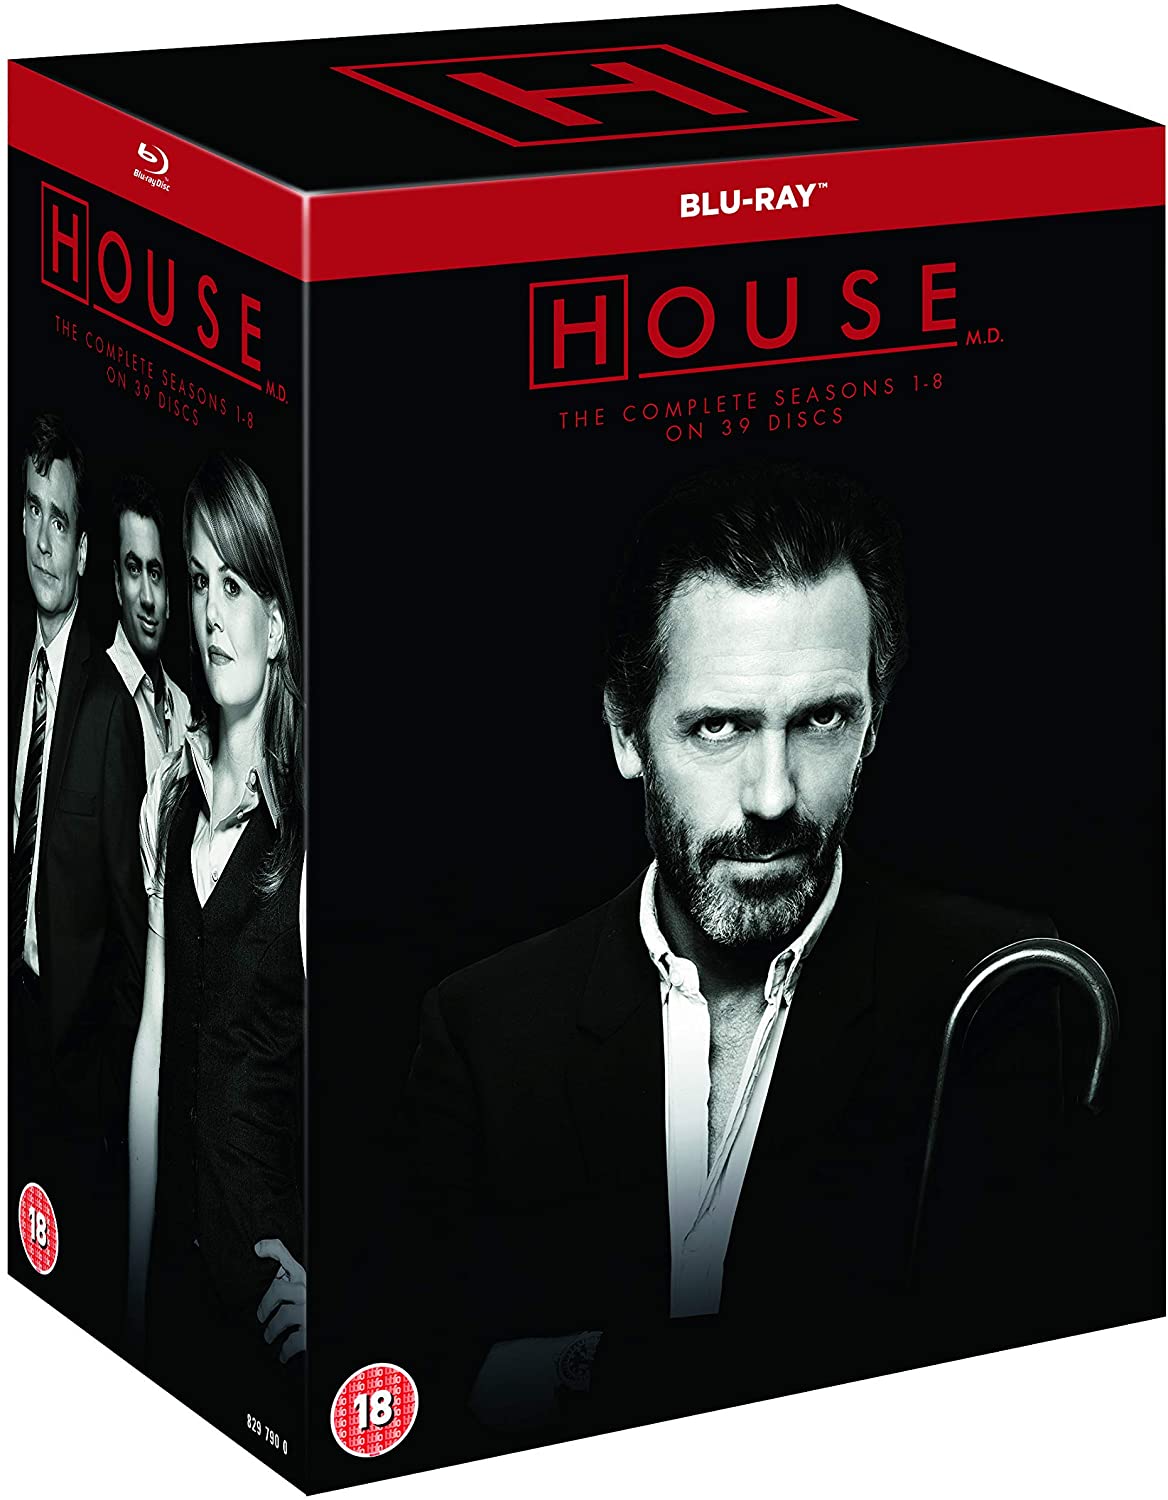 House: The Complete Series 1-8 (Blu-ray)